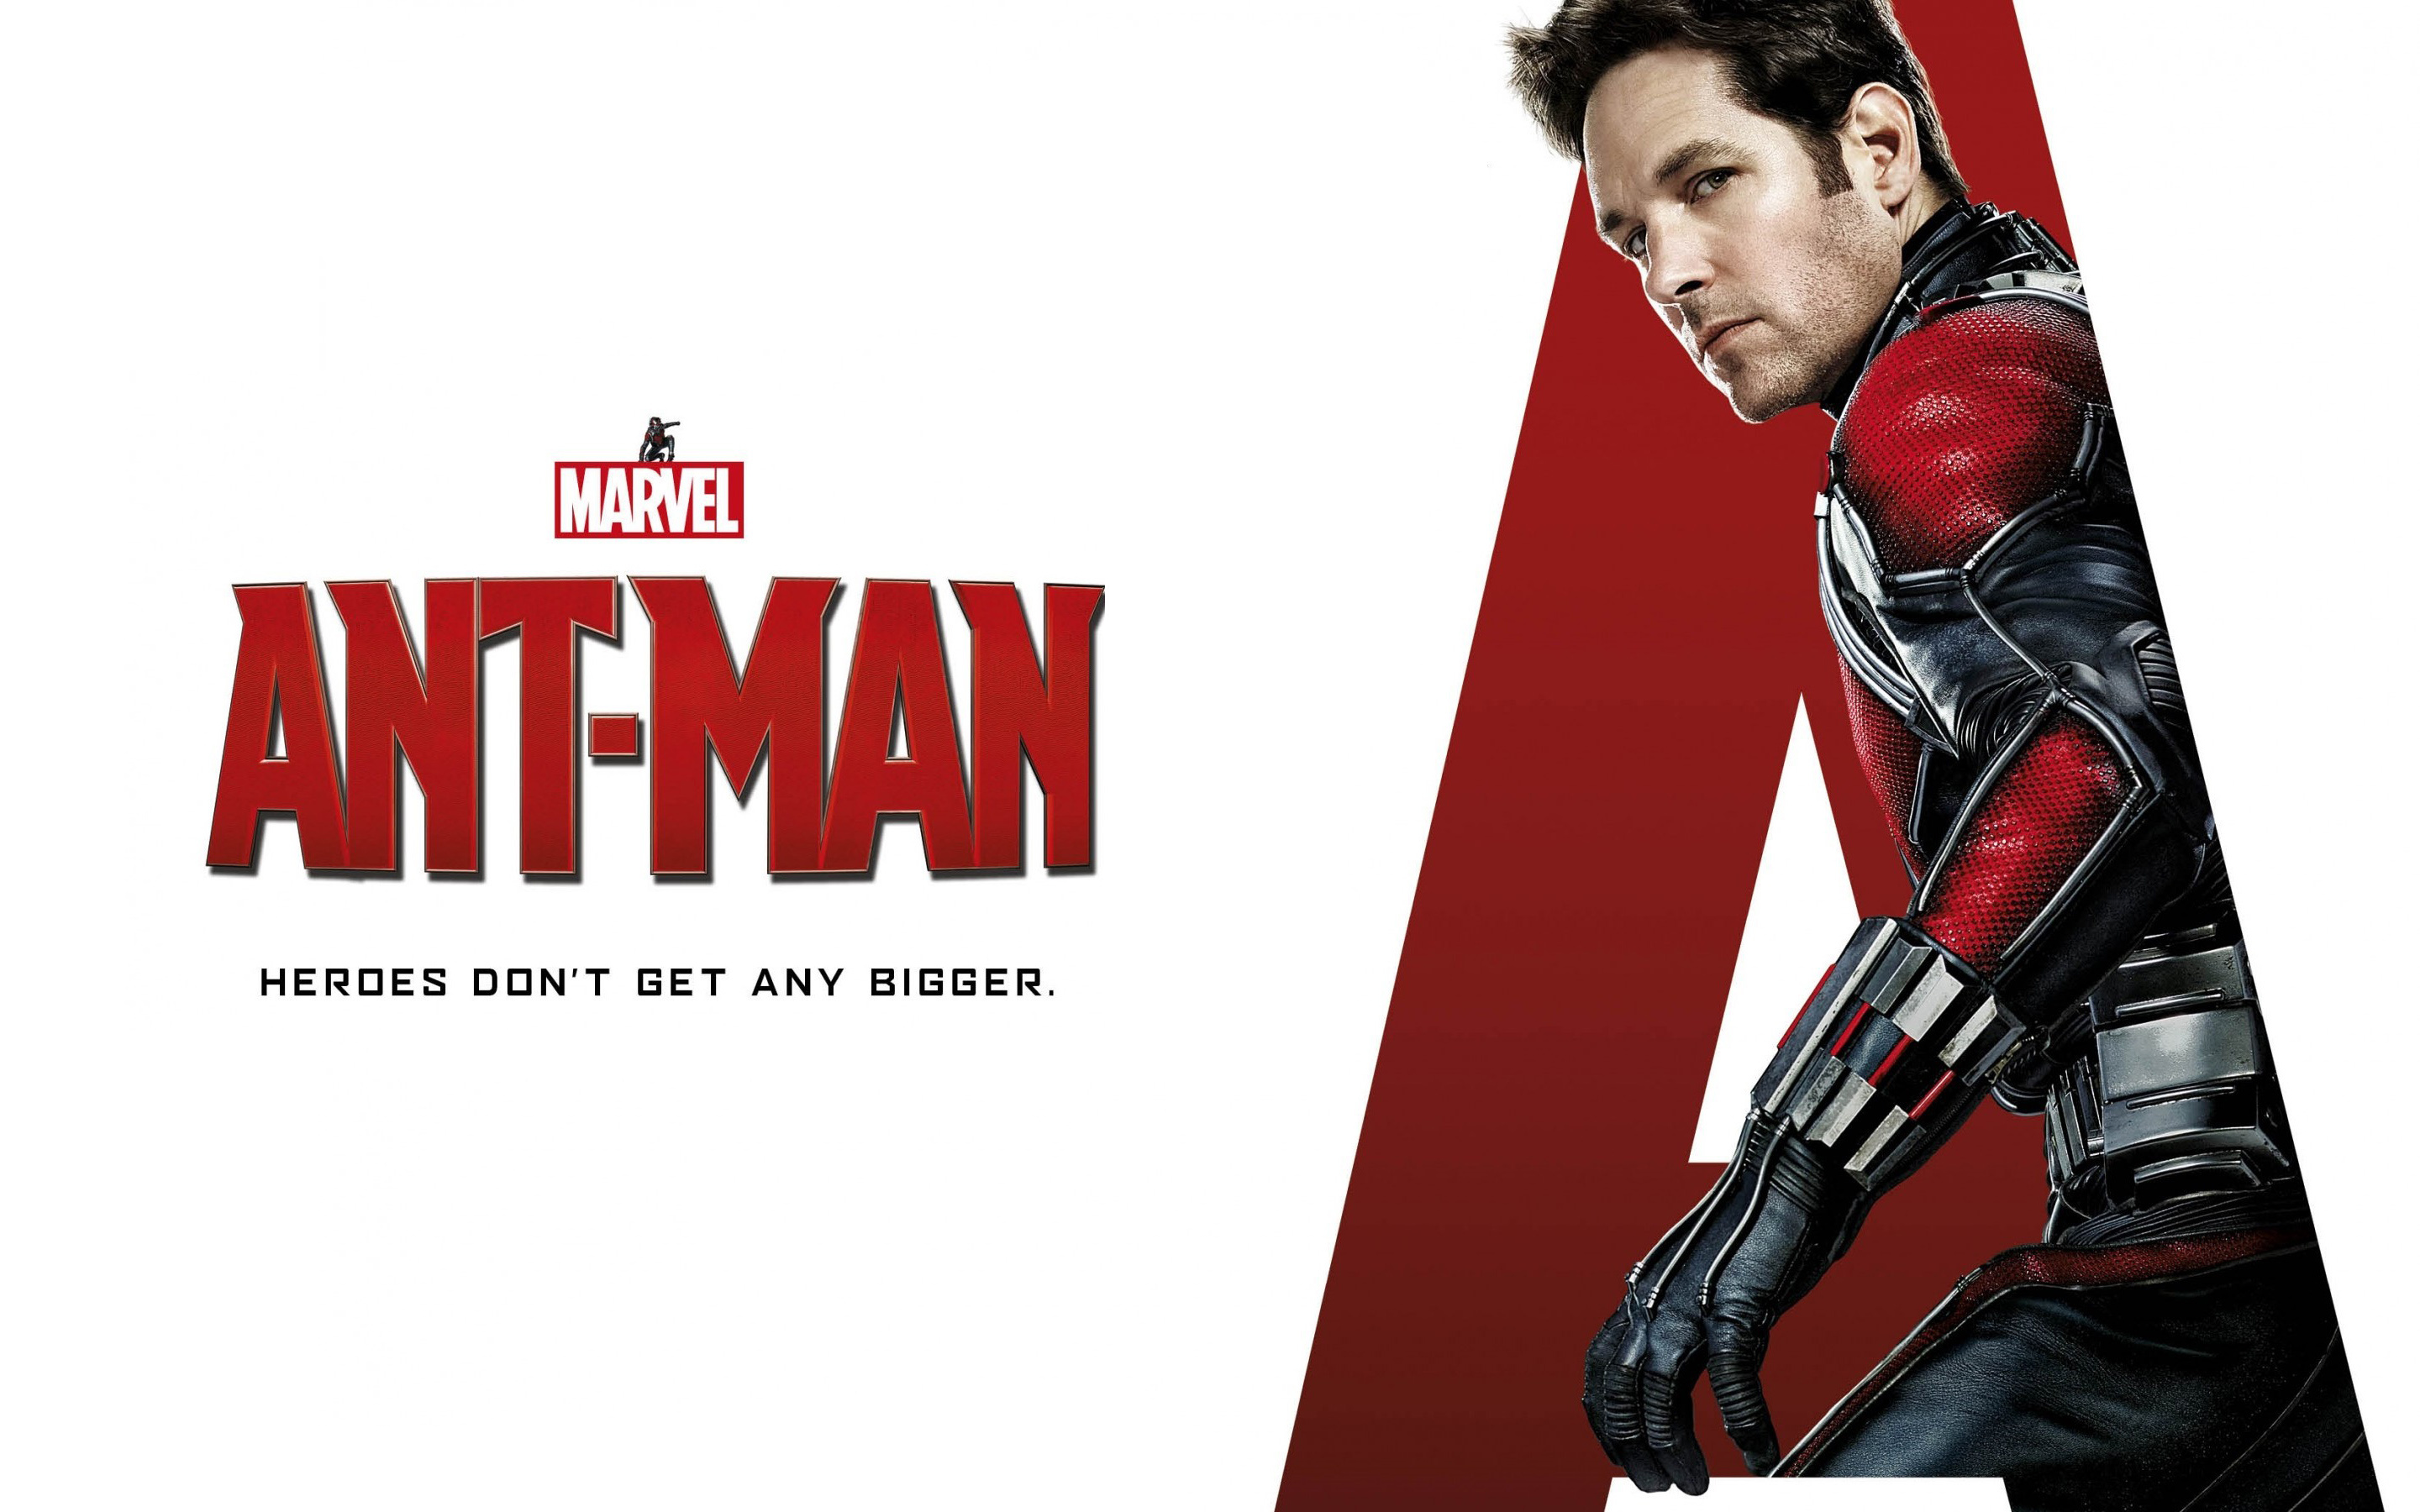 Paul Rudd: Was cast as Andy in a 2001 comedy film, Wet Hot American Summer, Ant-Man. 2880x1800 HD Background.